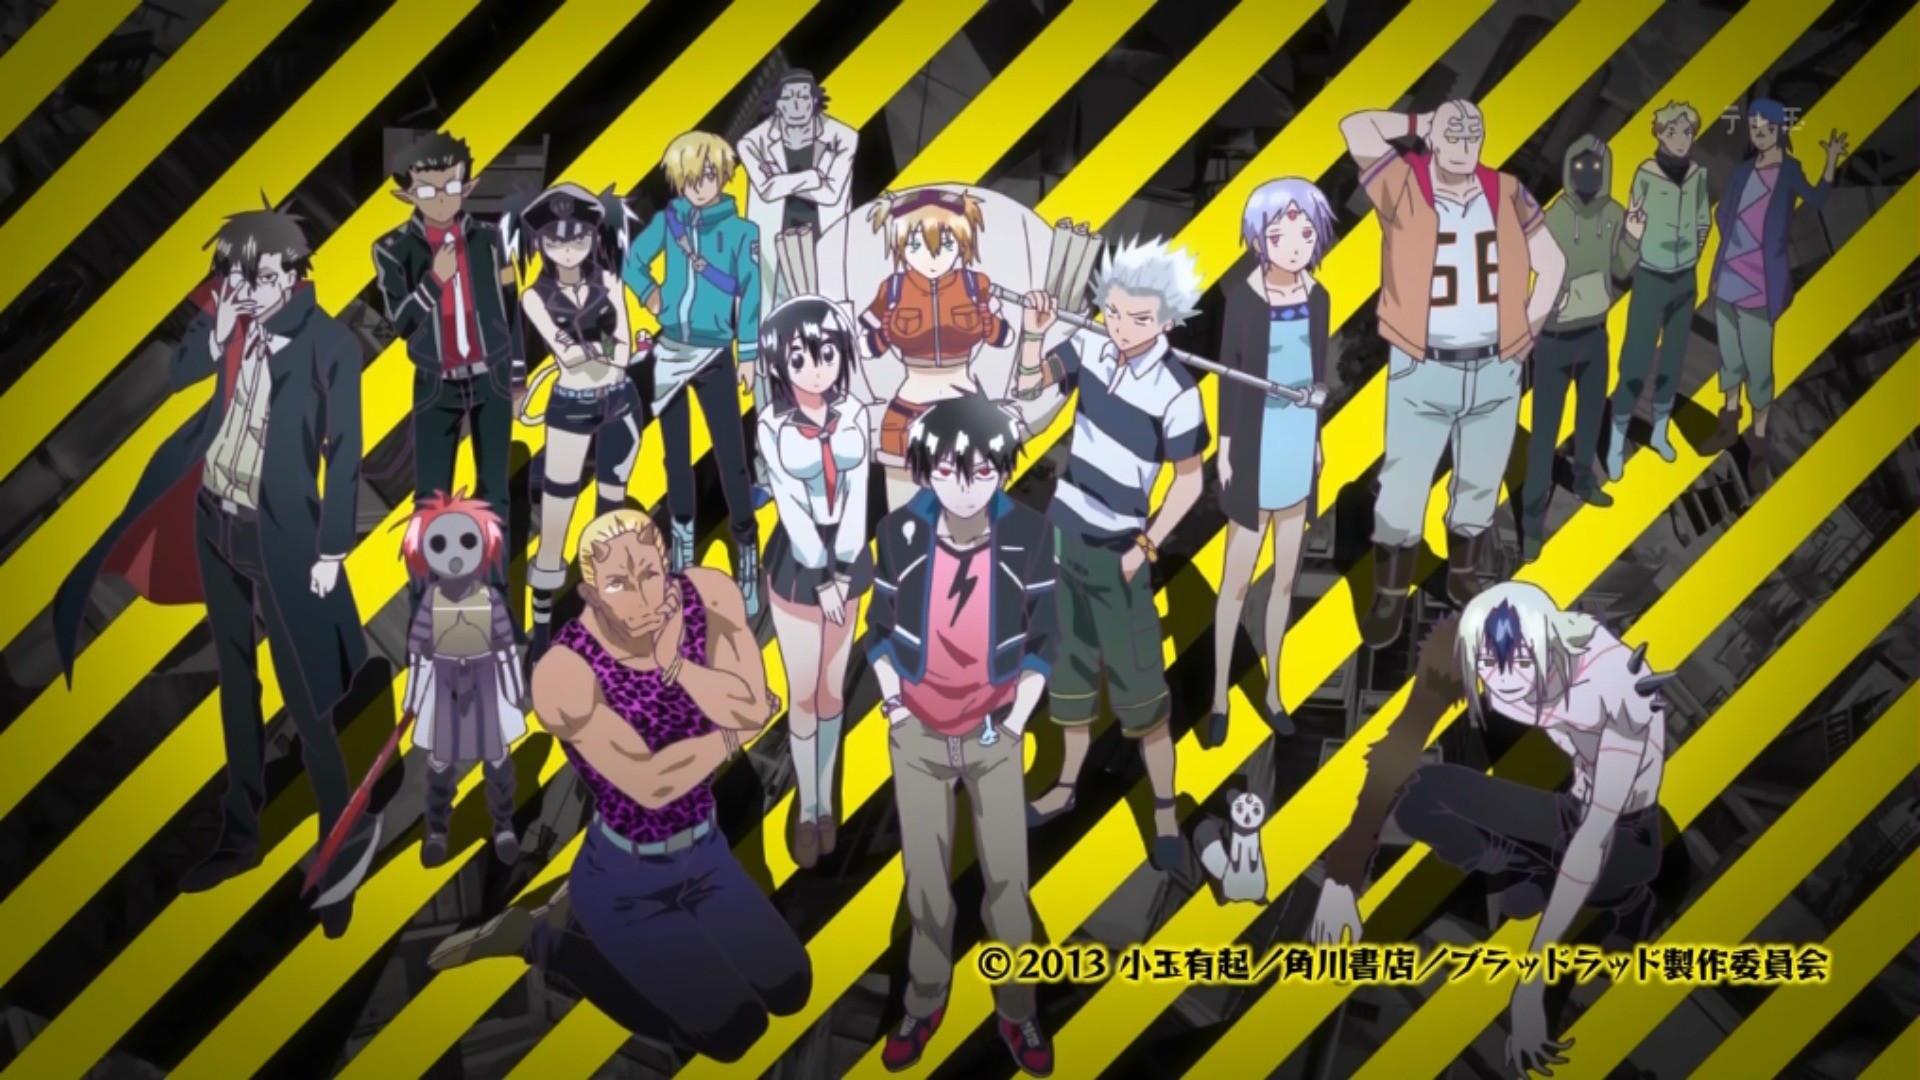 1920x1080 Blood Lad Anime Review